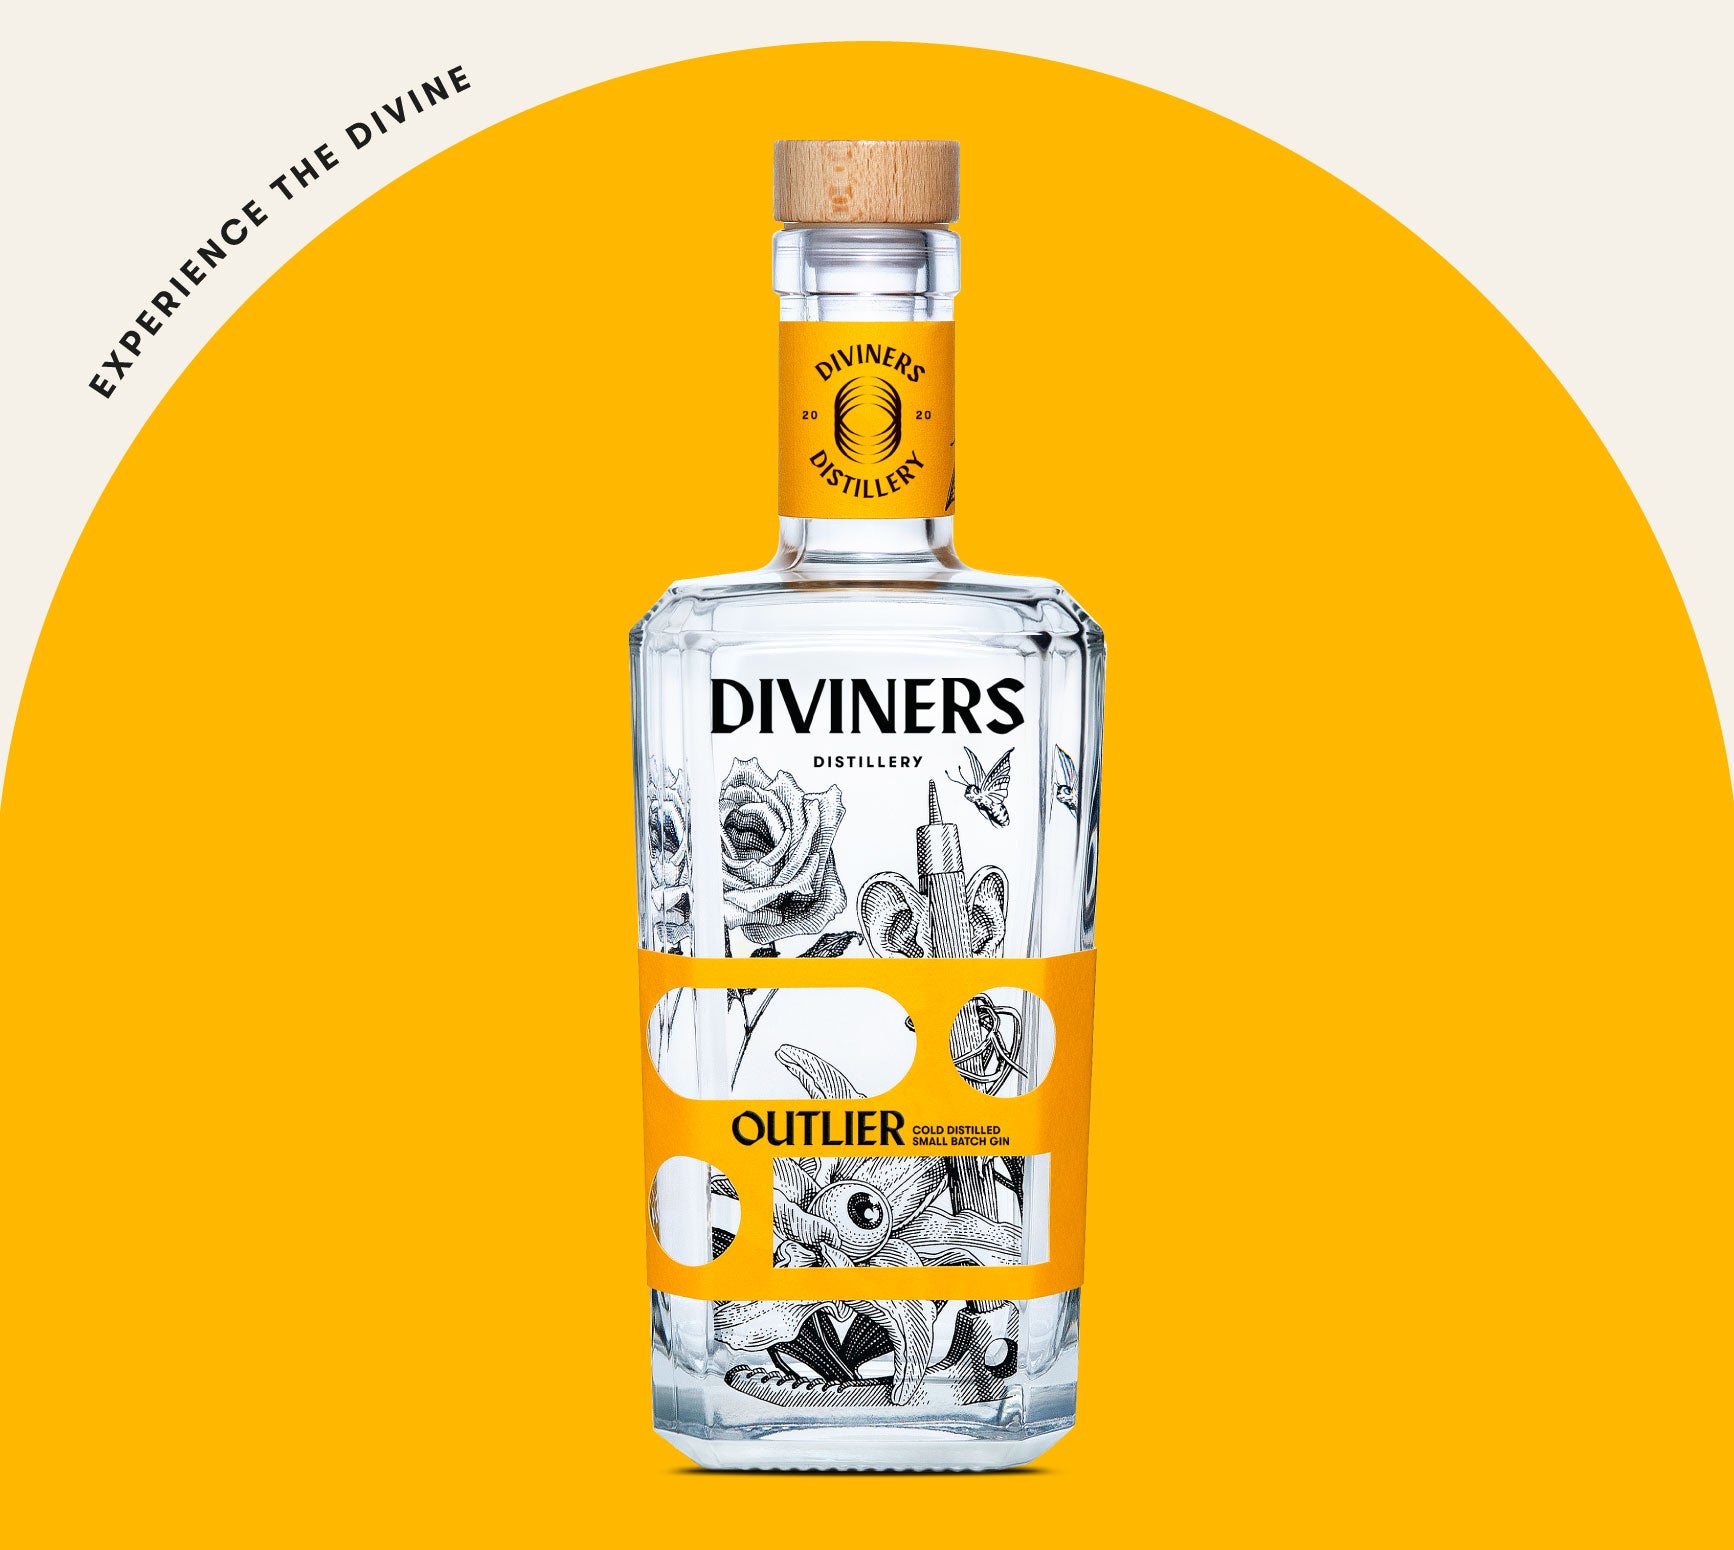 Outlier bottle with yellow label. Top 10 Australian Gins. Experience the divine.